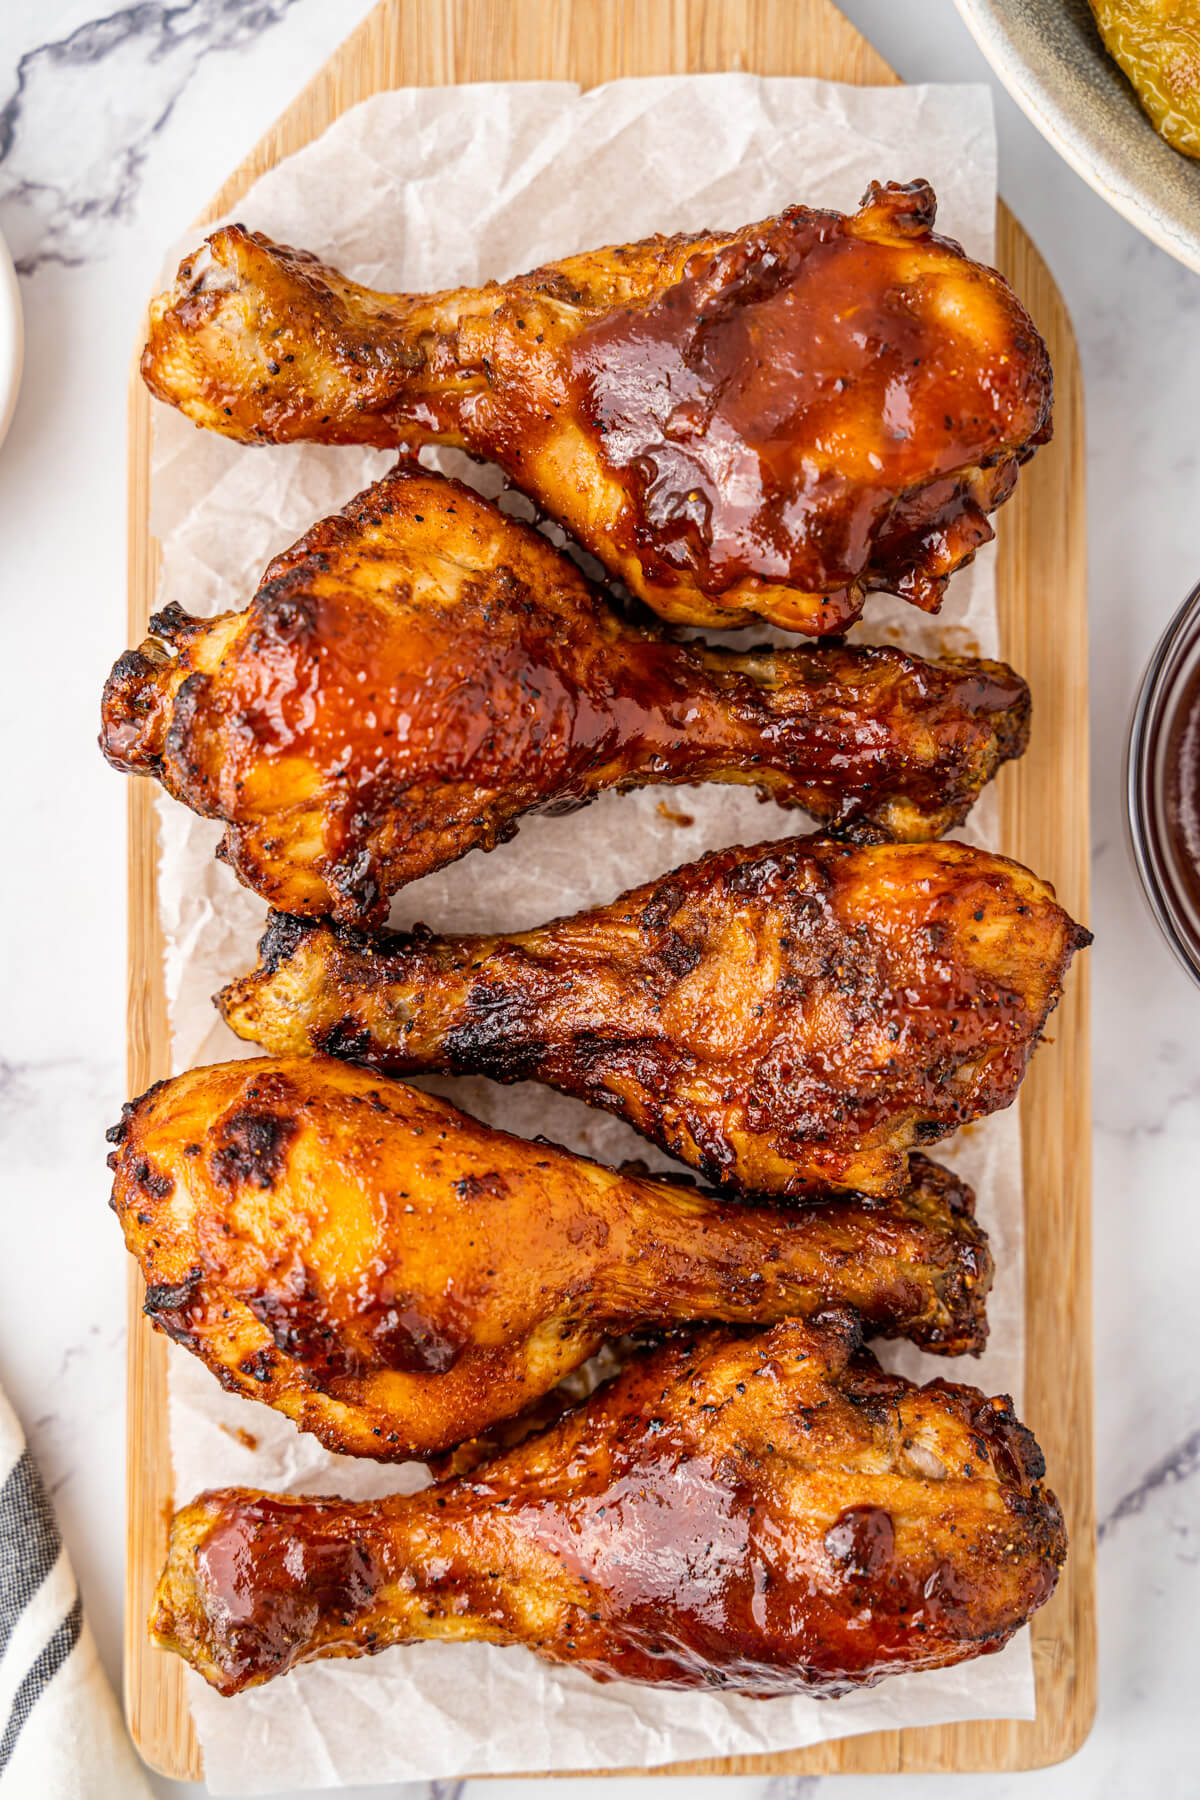 Crispy cooked chicken drumsticks coated in barbecue sauce on a platter.